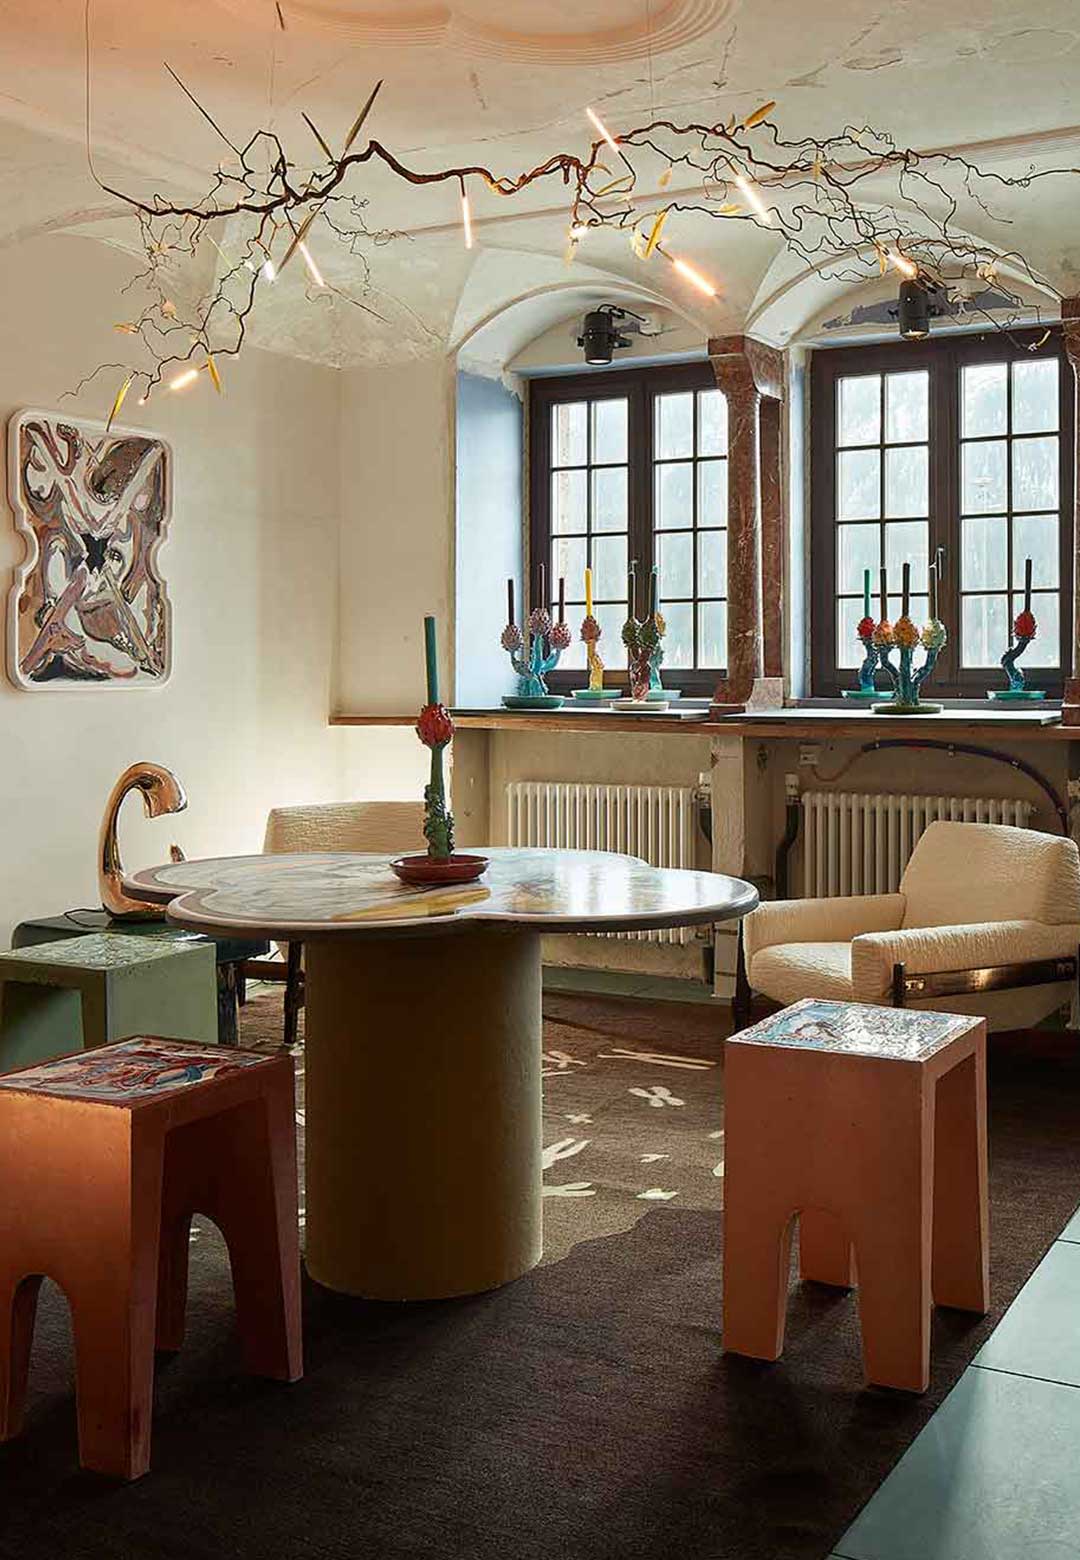 A journey from vintage to contemporary designs at the Nomad St Moritz exhibition